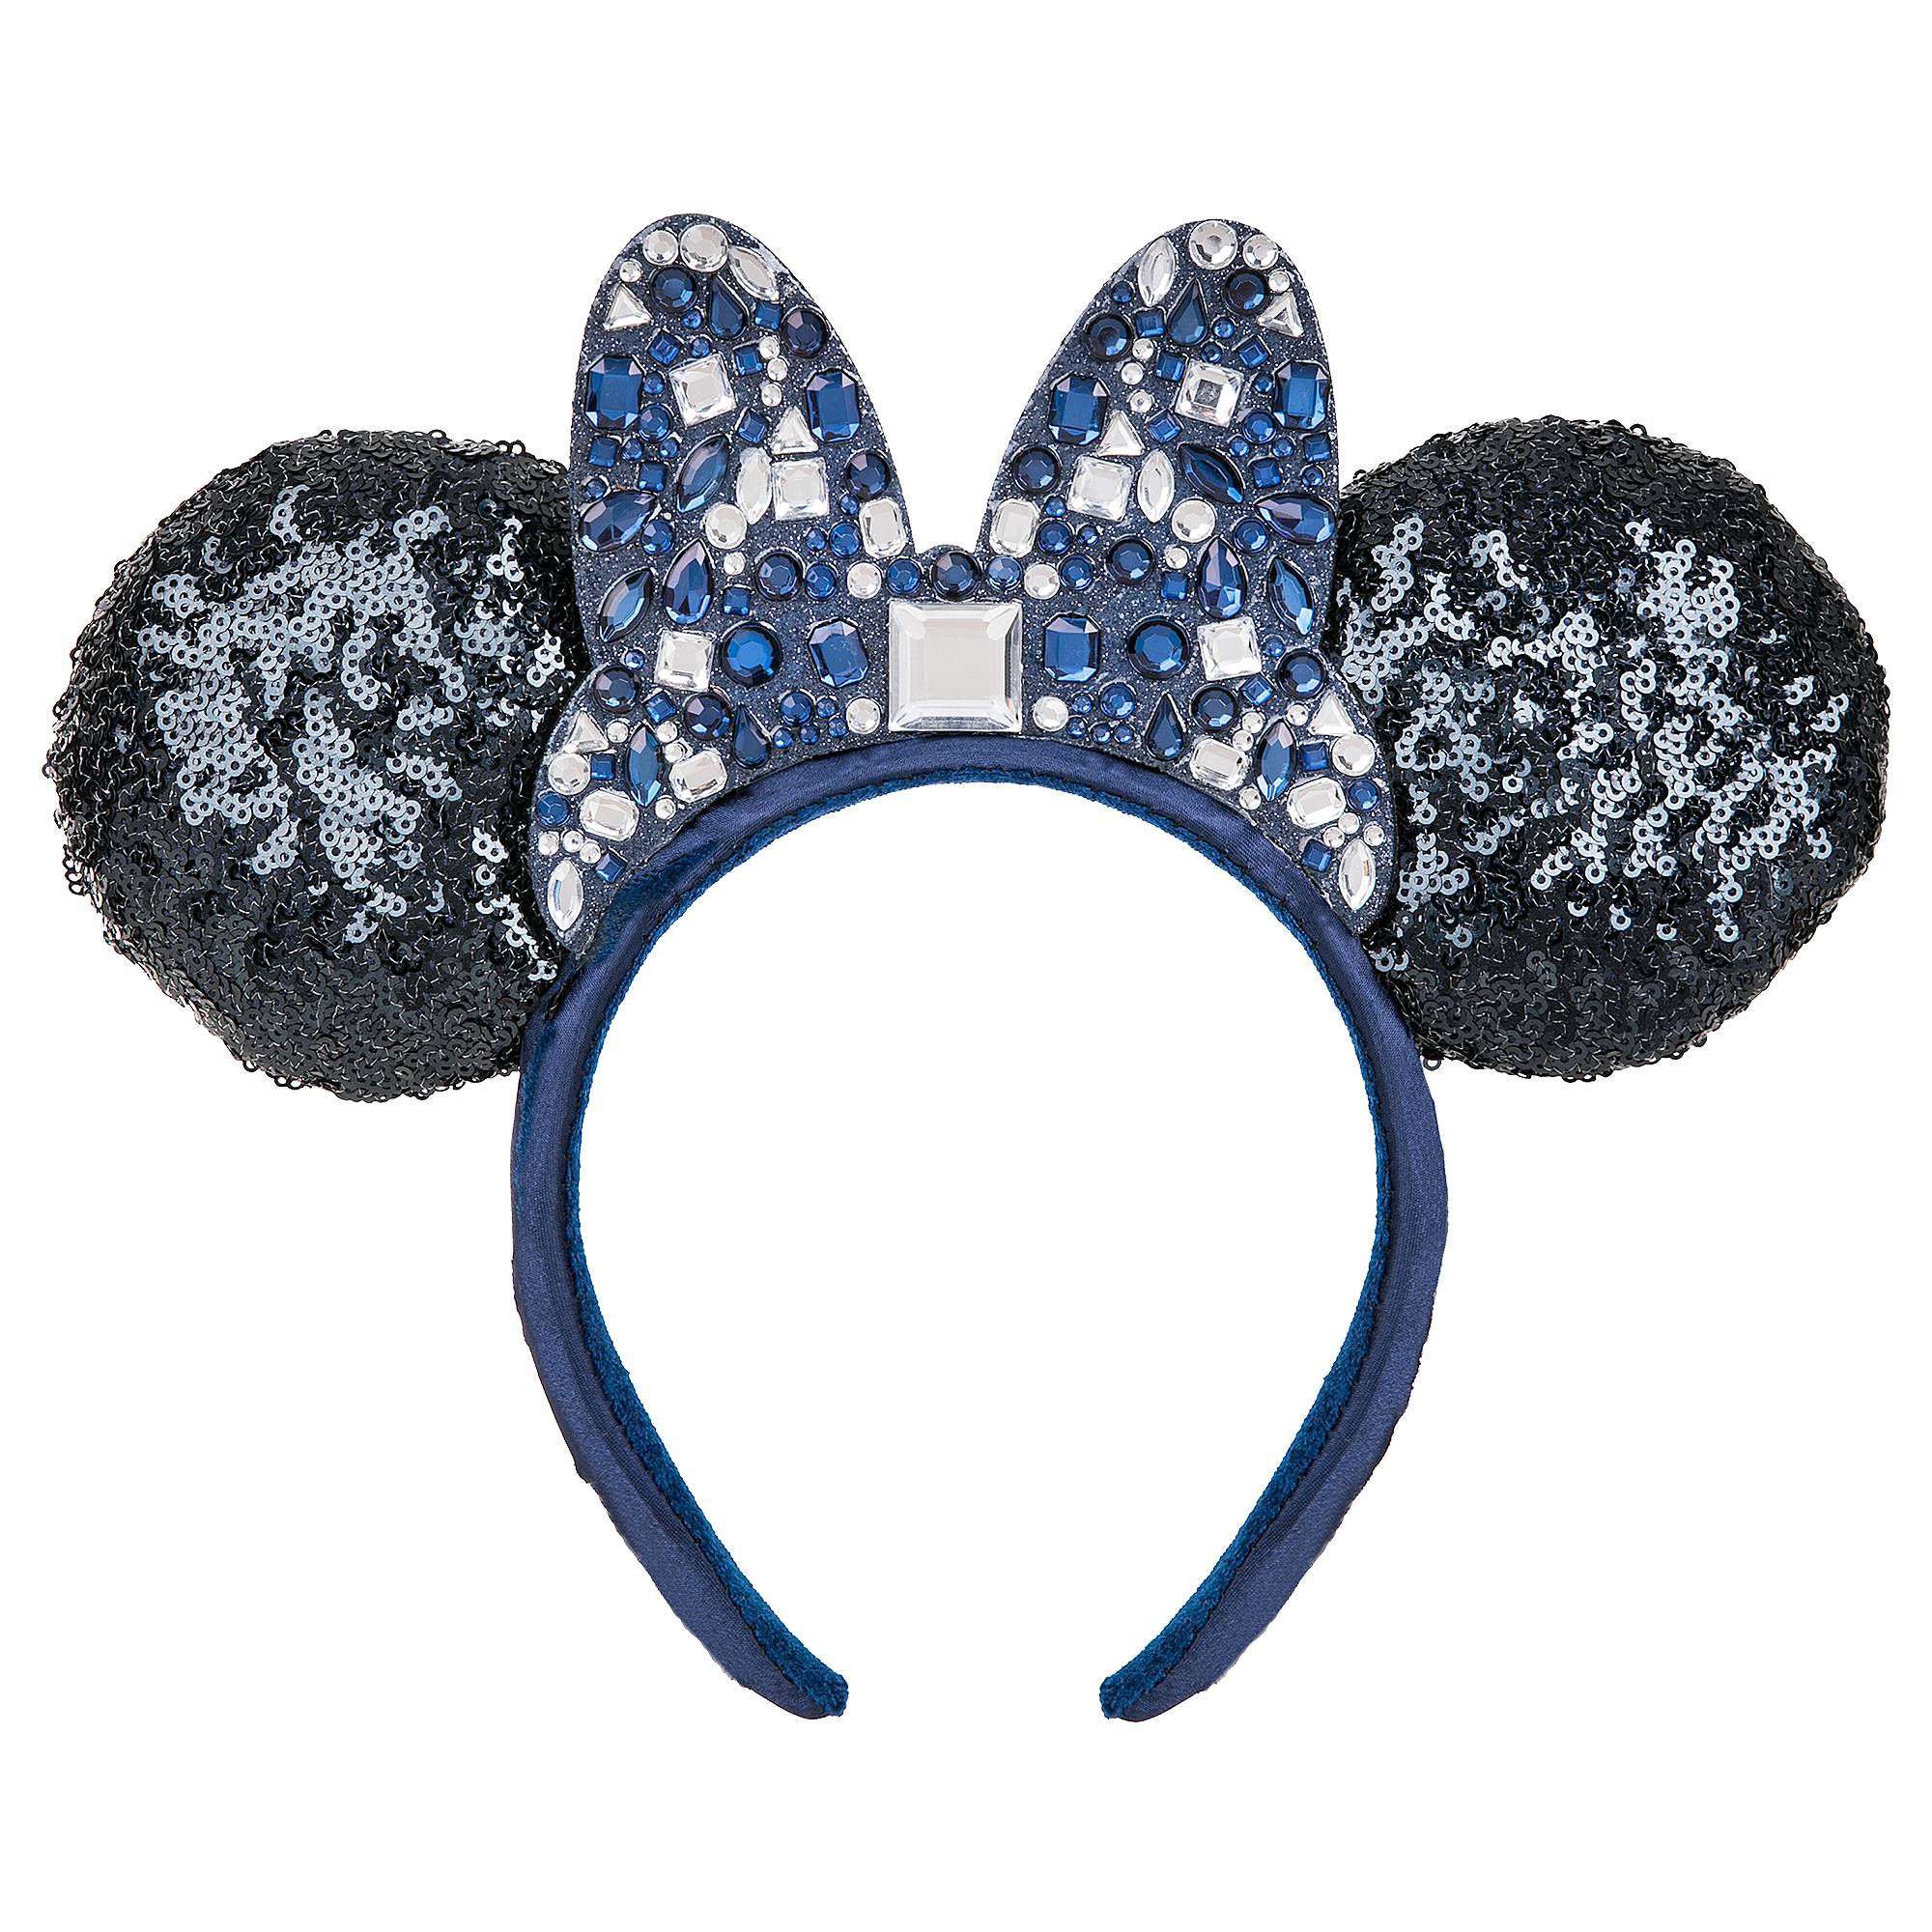 Minnie Mouse Sequined Ear Headband with Jeweled Bow – Disneyland 65th Anniversary image